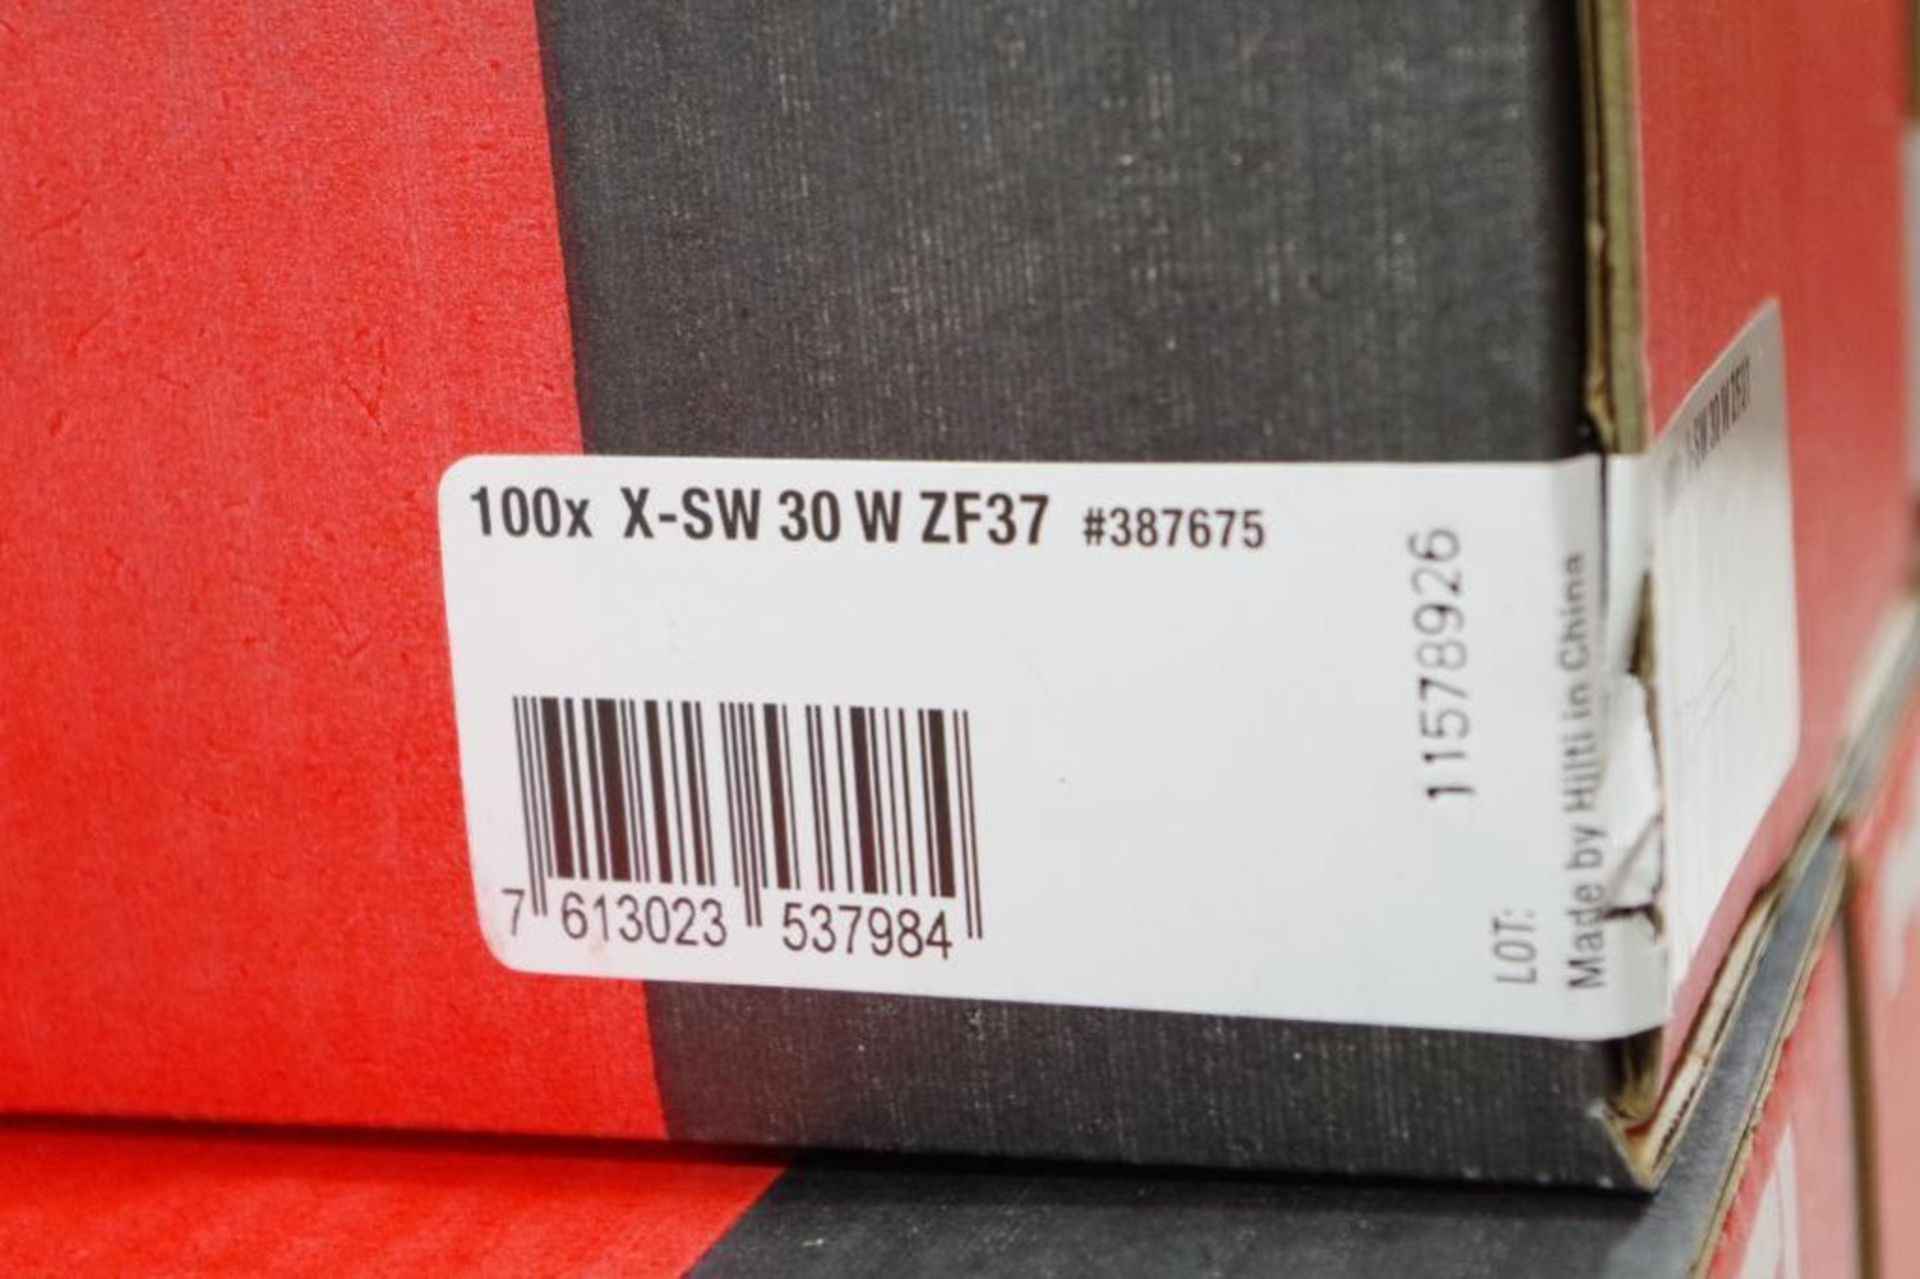 [800] HILTI Soft Washer Fasteners X-SW 30 ZF37, M/N 387675 (8 Boxes of 100) - Image 3 of 4